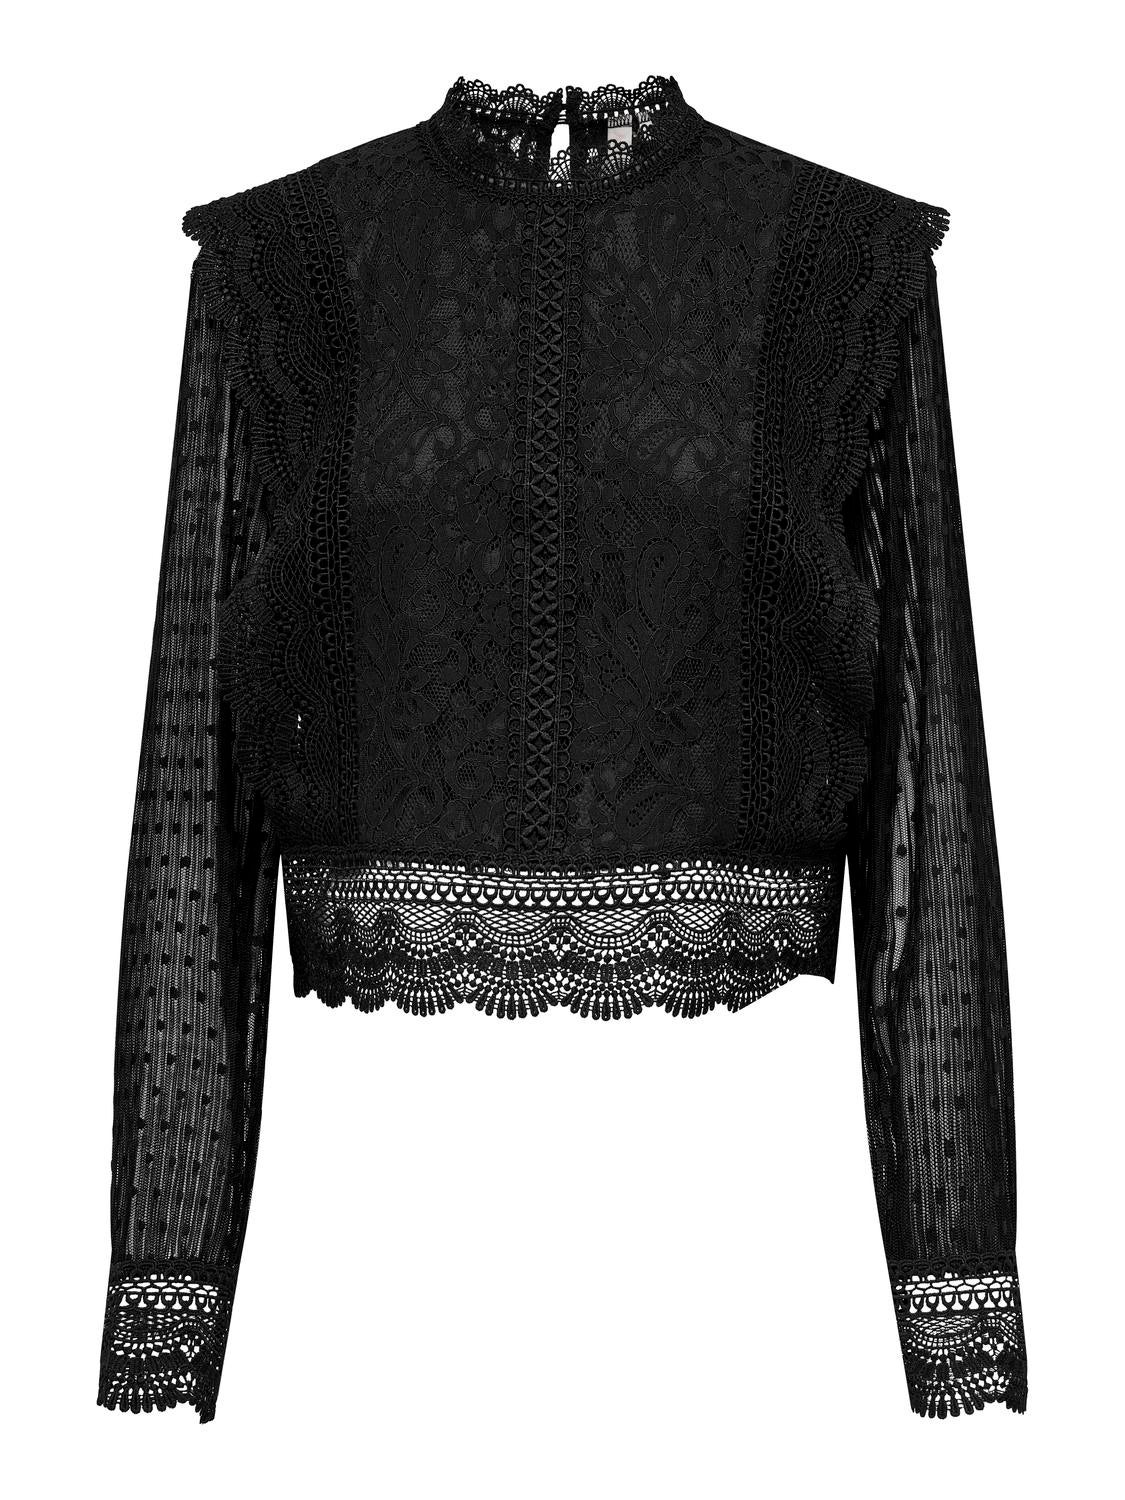 O-neck lace top | Black | ONLY®